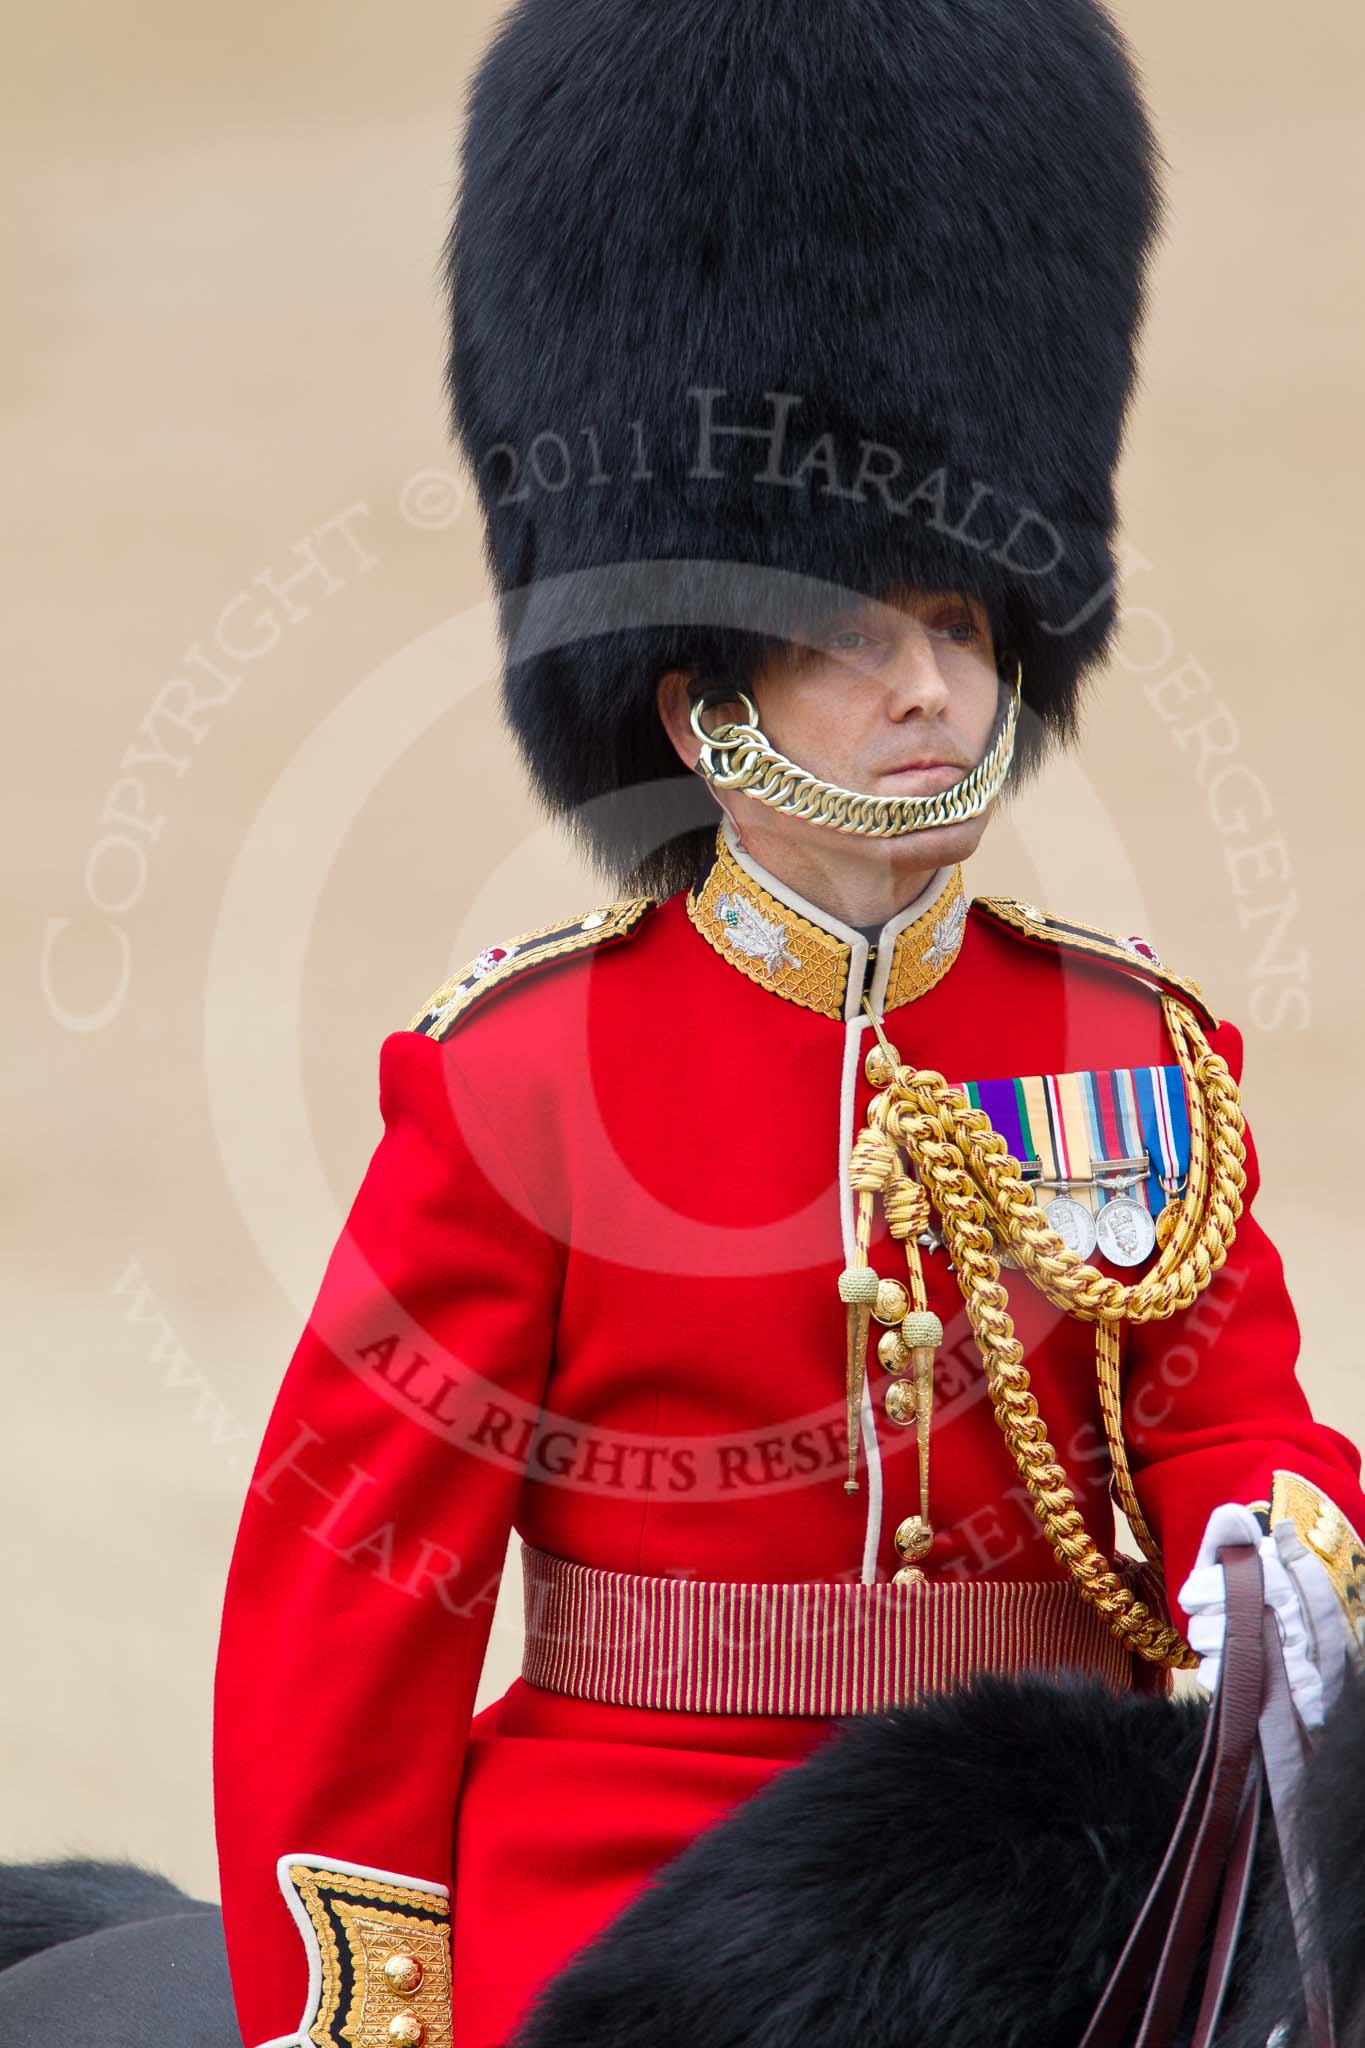 Trooping the Colour 2011: Close-up of the Brigade Major Household Division, Lieutenant Colonel A P Speed, Scots Guards..
Horse Guards Parade, Westminster,
London SW1,
Greater London,
United Kingdom,
on 11 June 2011 at 11:07, image #167